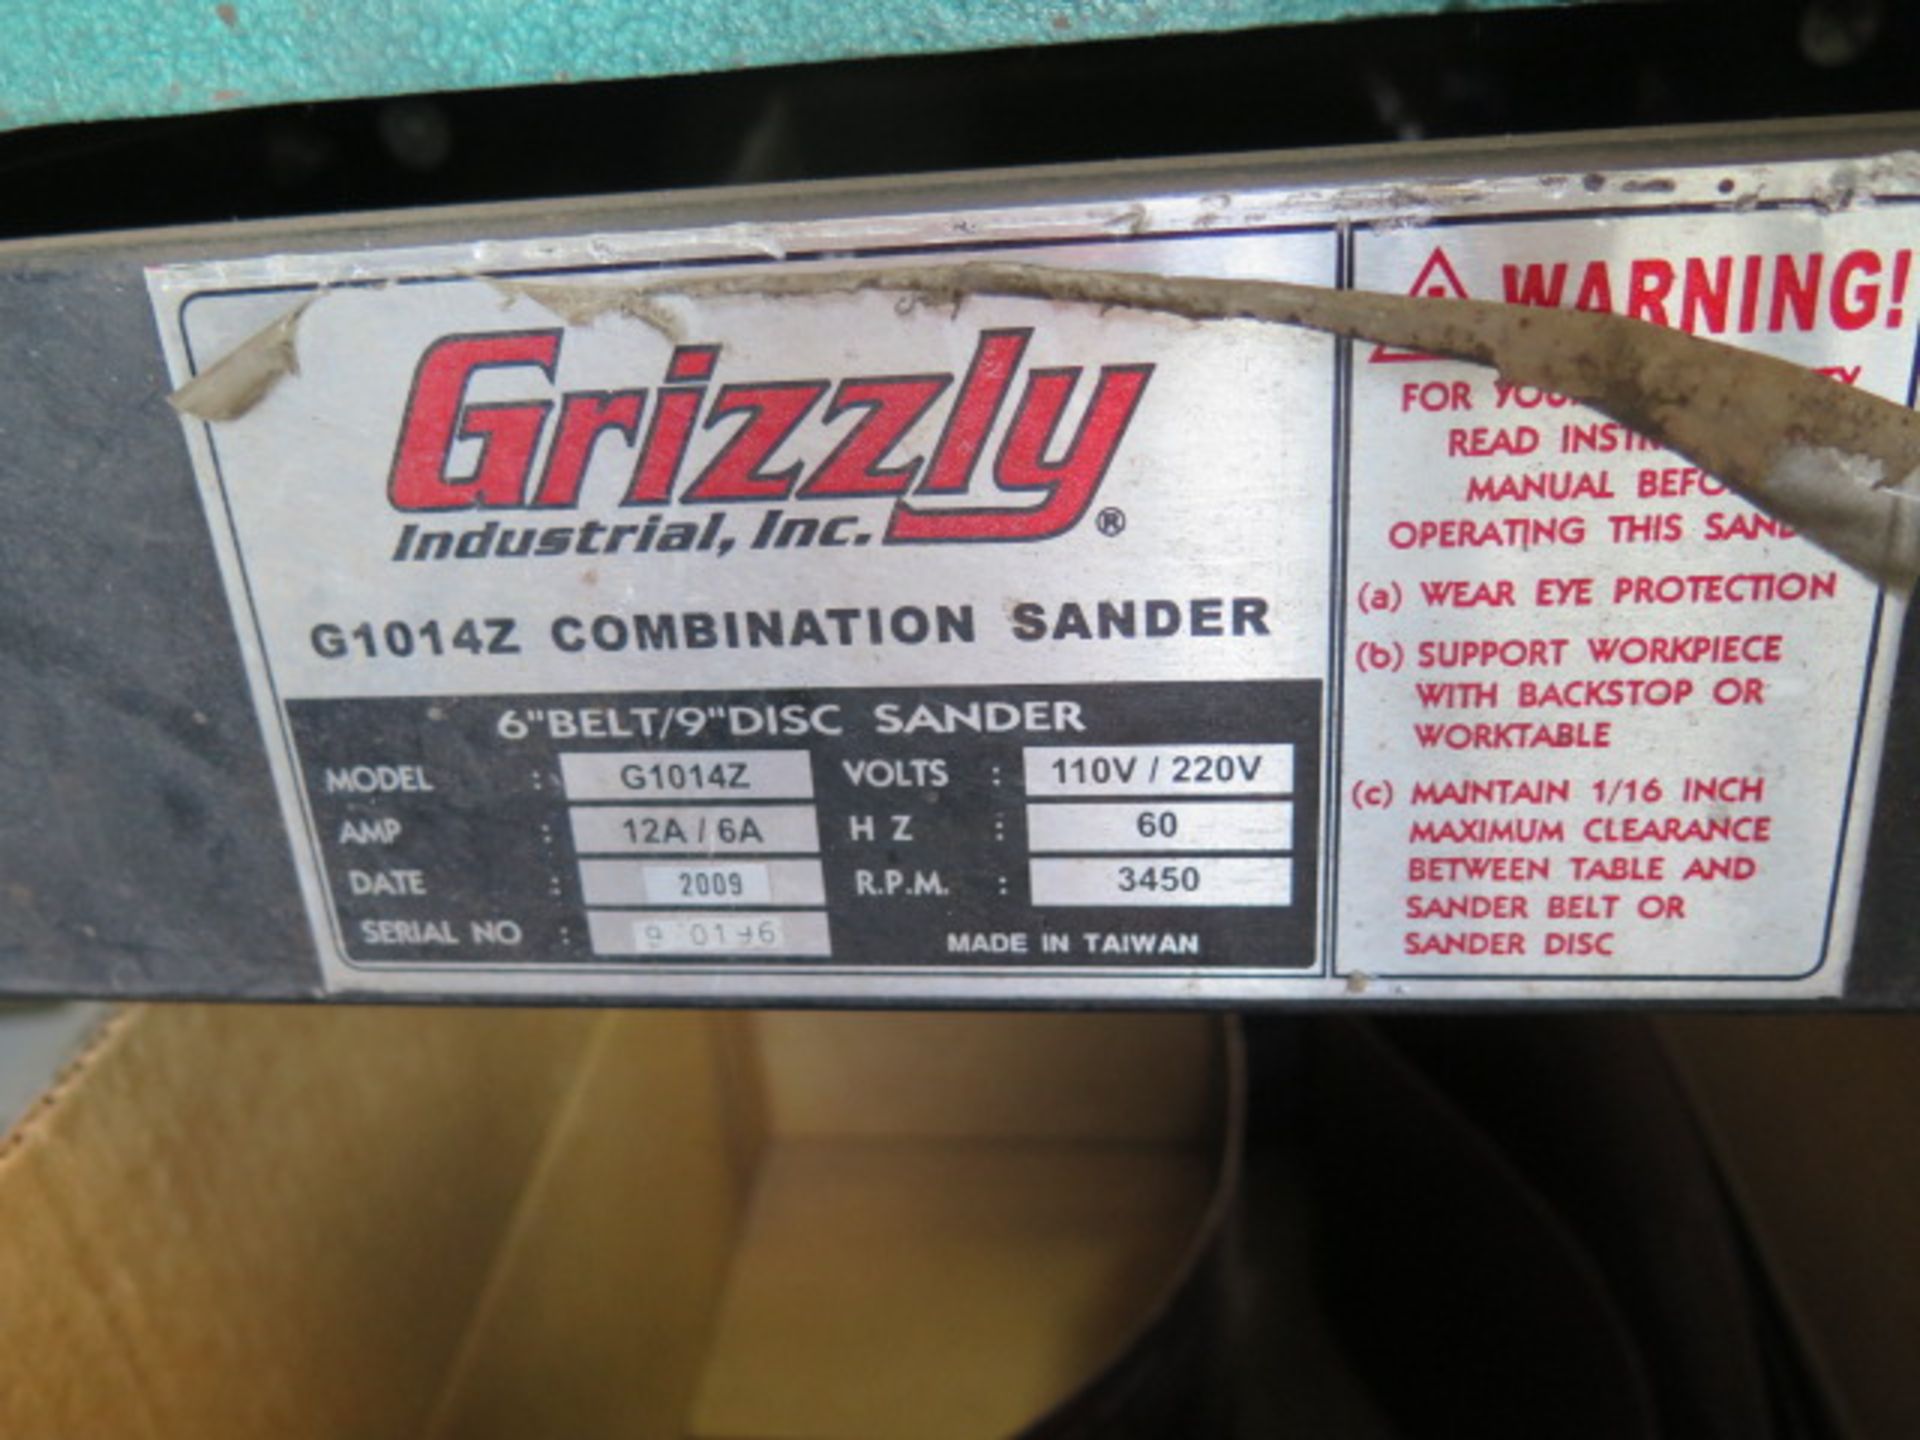 Grizzly mdl. G1014Z 6" Belt / 9" Disc Sander s/n 9-0196 w/ Roll Stand (SOLD AS-IS - NO WARRANTY) - Image 7 of 7